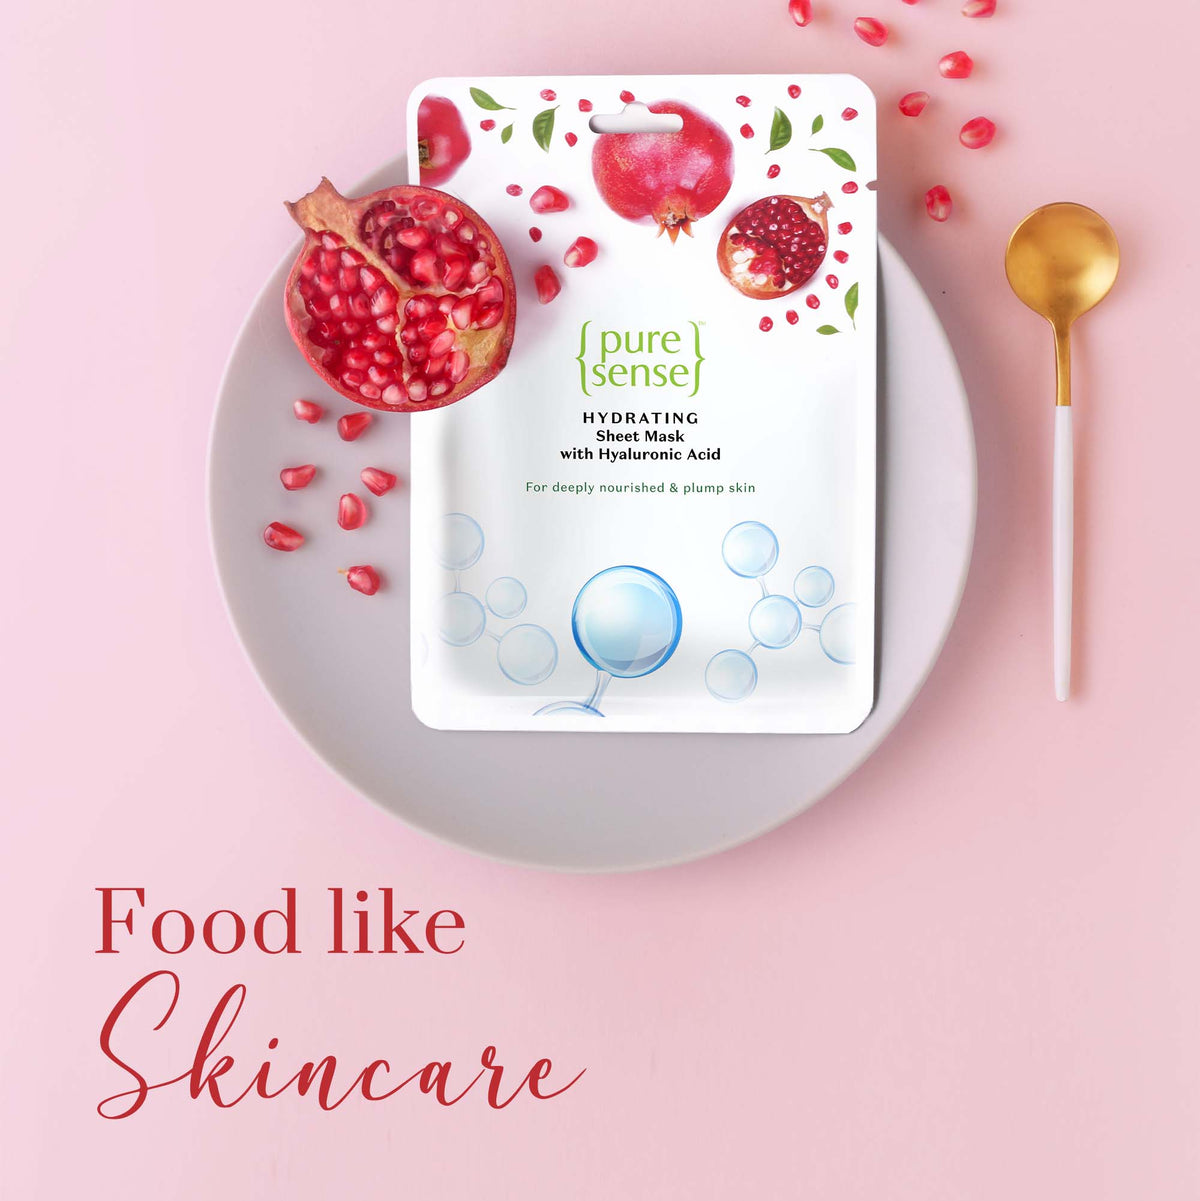 Hydrating Sheet Mask with Hyaluronic Acid |  From the makers of Parachute Advansed | 15ml